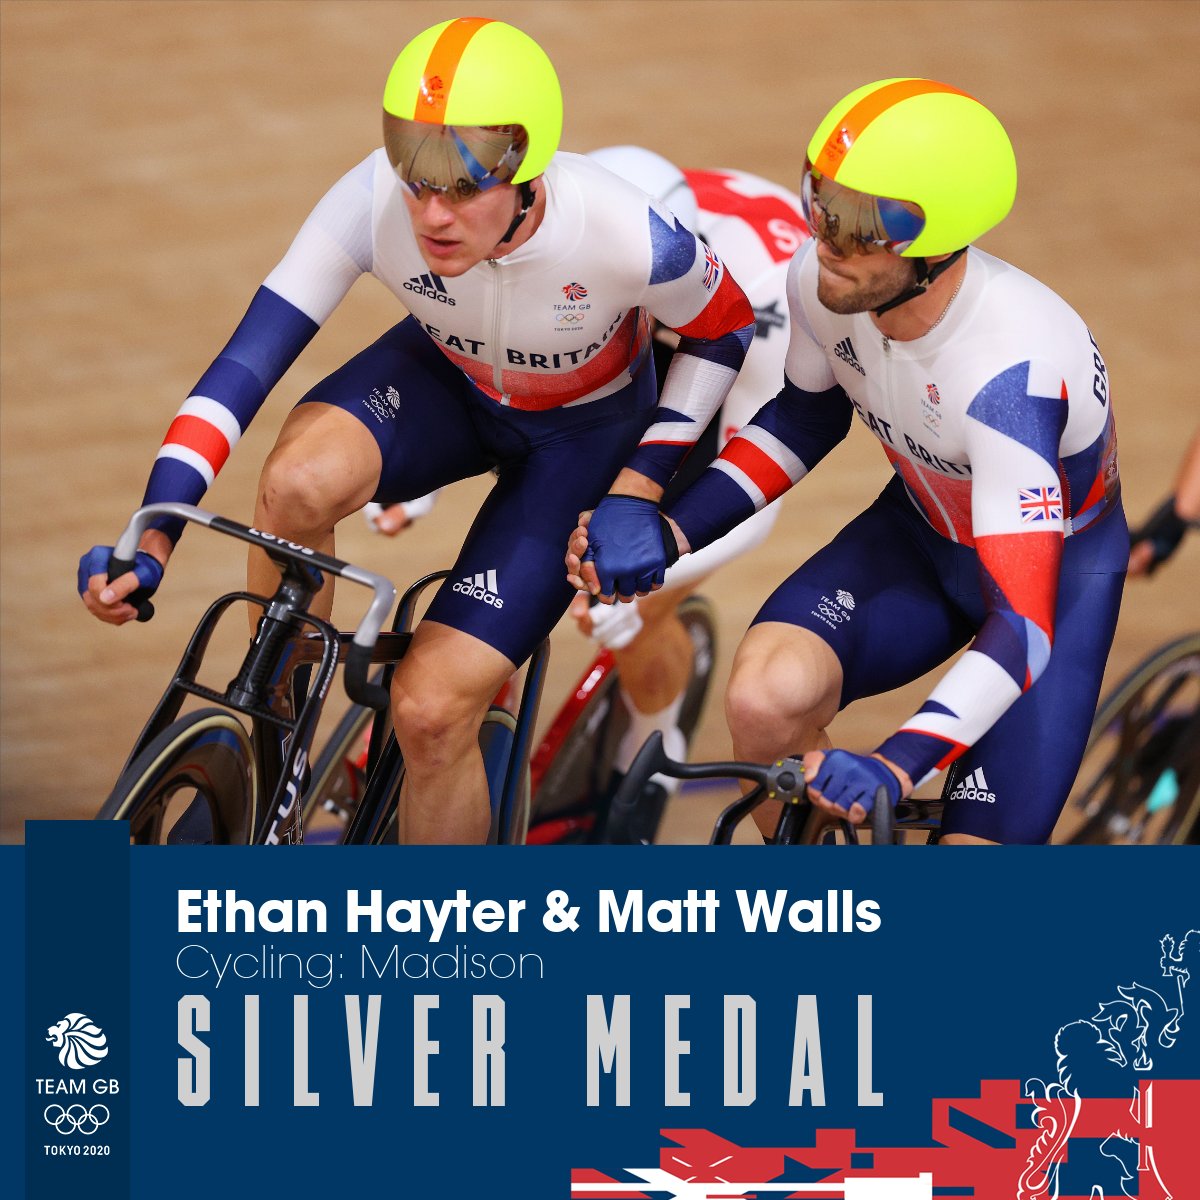 Finishing in style 🥈 @ethan_hayter and @wallsey_98 make a late charge in the Madison to claim another Olympic medal on the track. #TeamGB